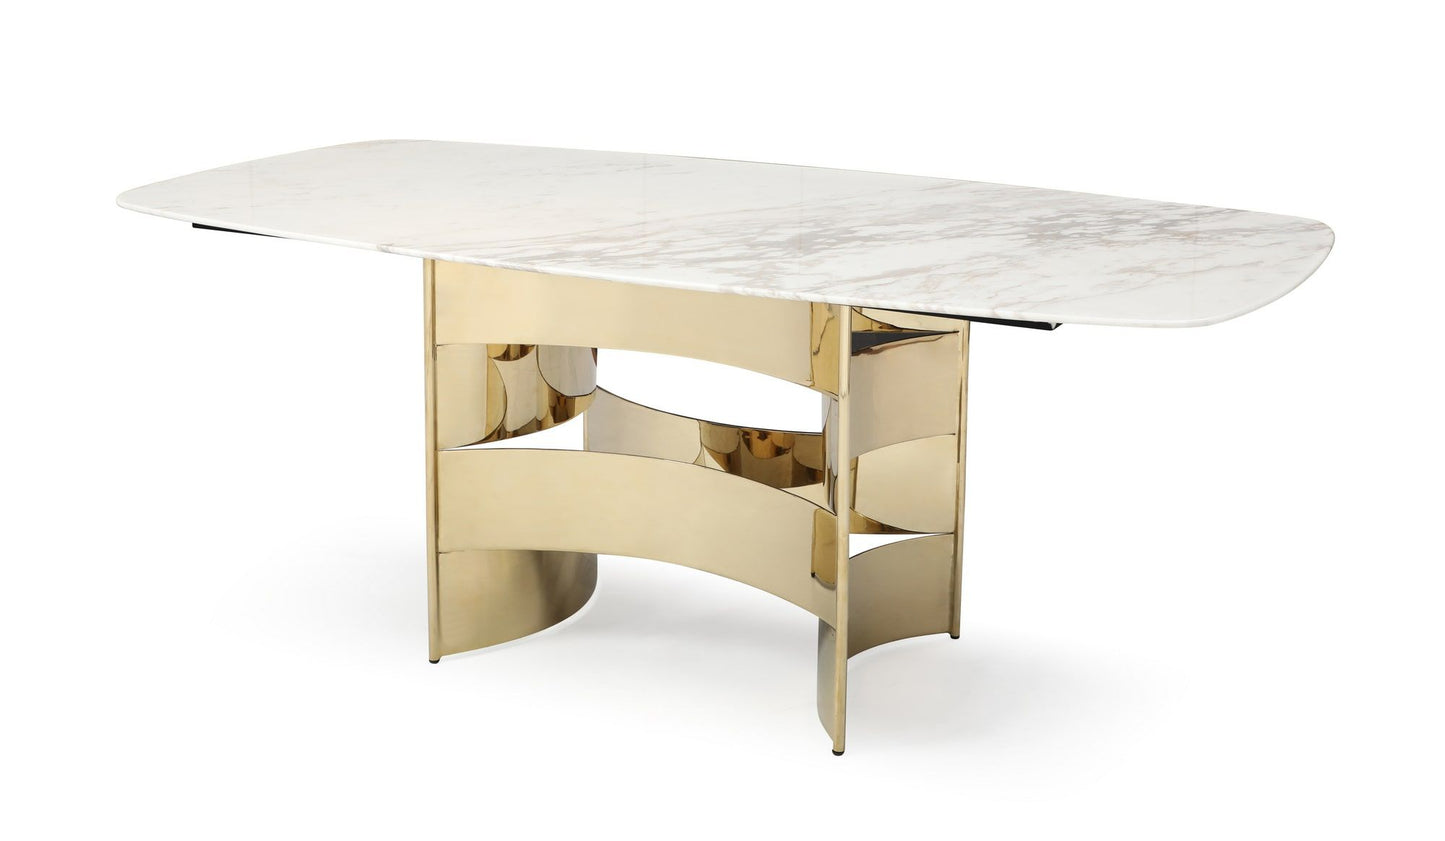 Modrest Marmot - White Marble and Champagne Gold Dining Table